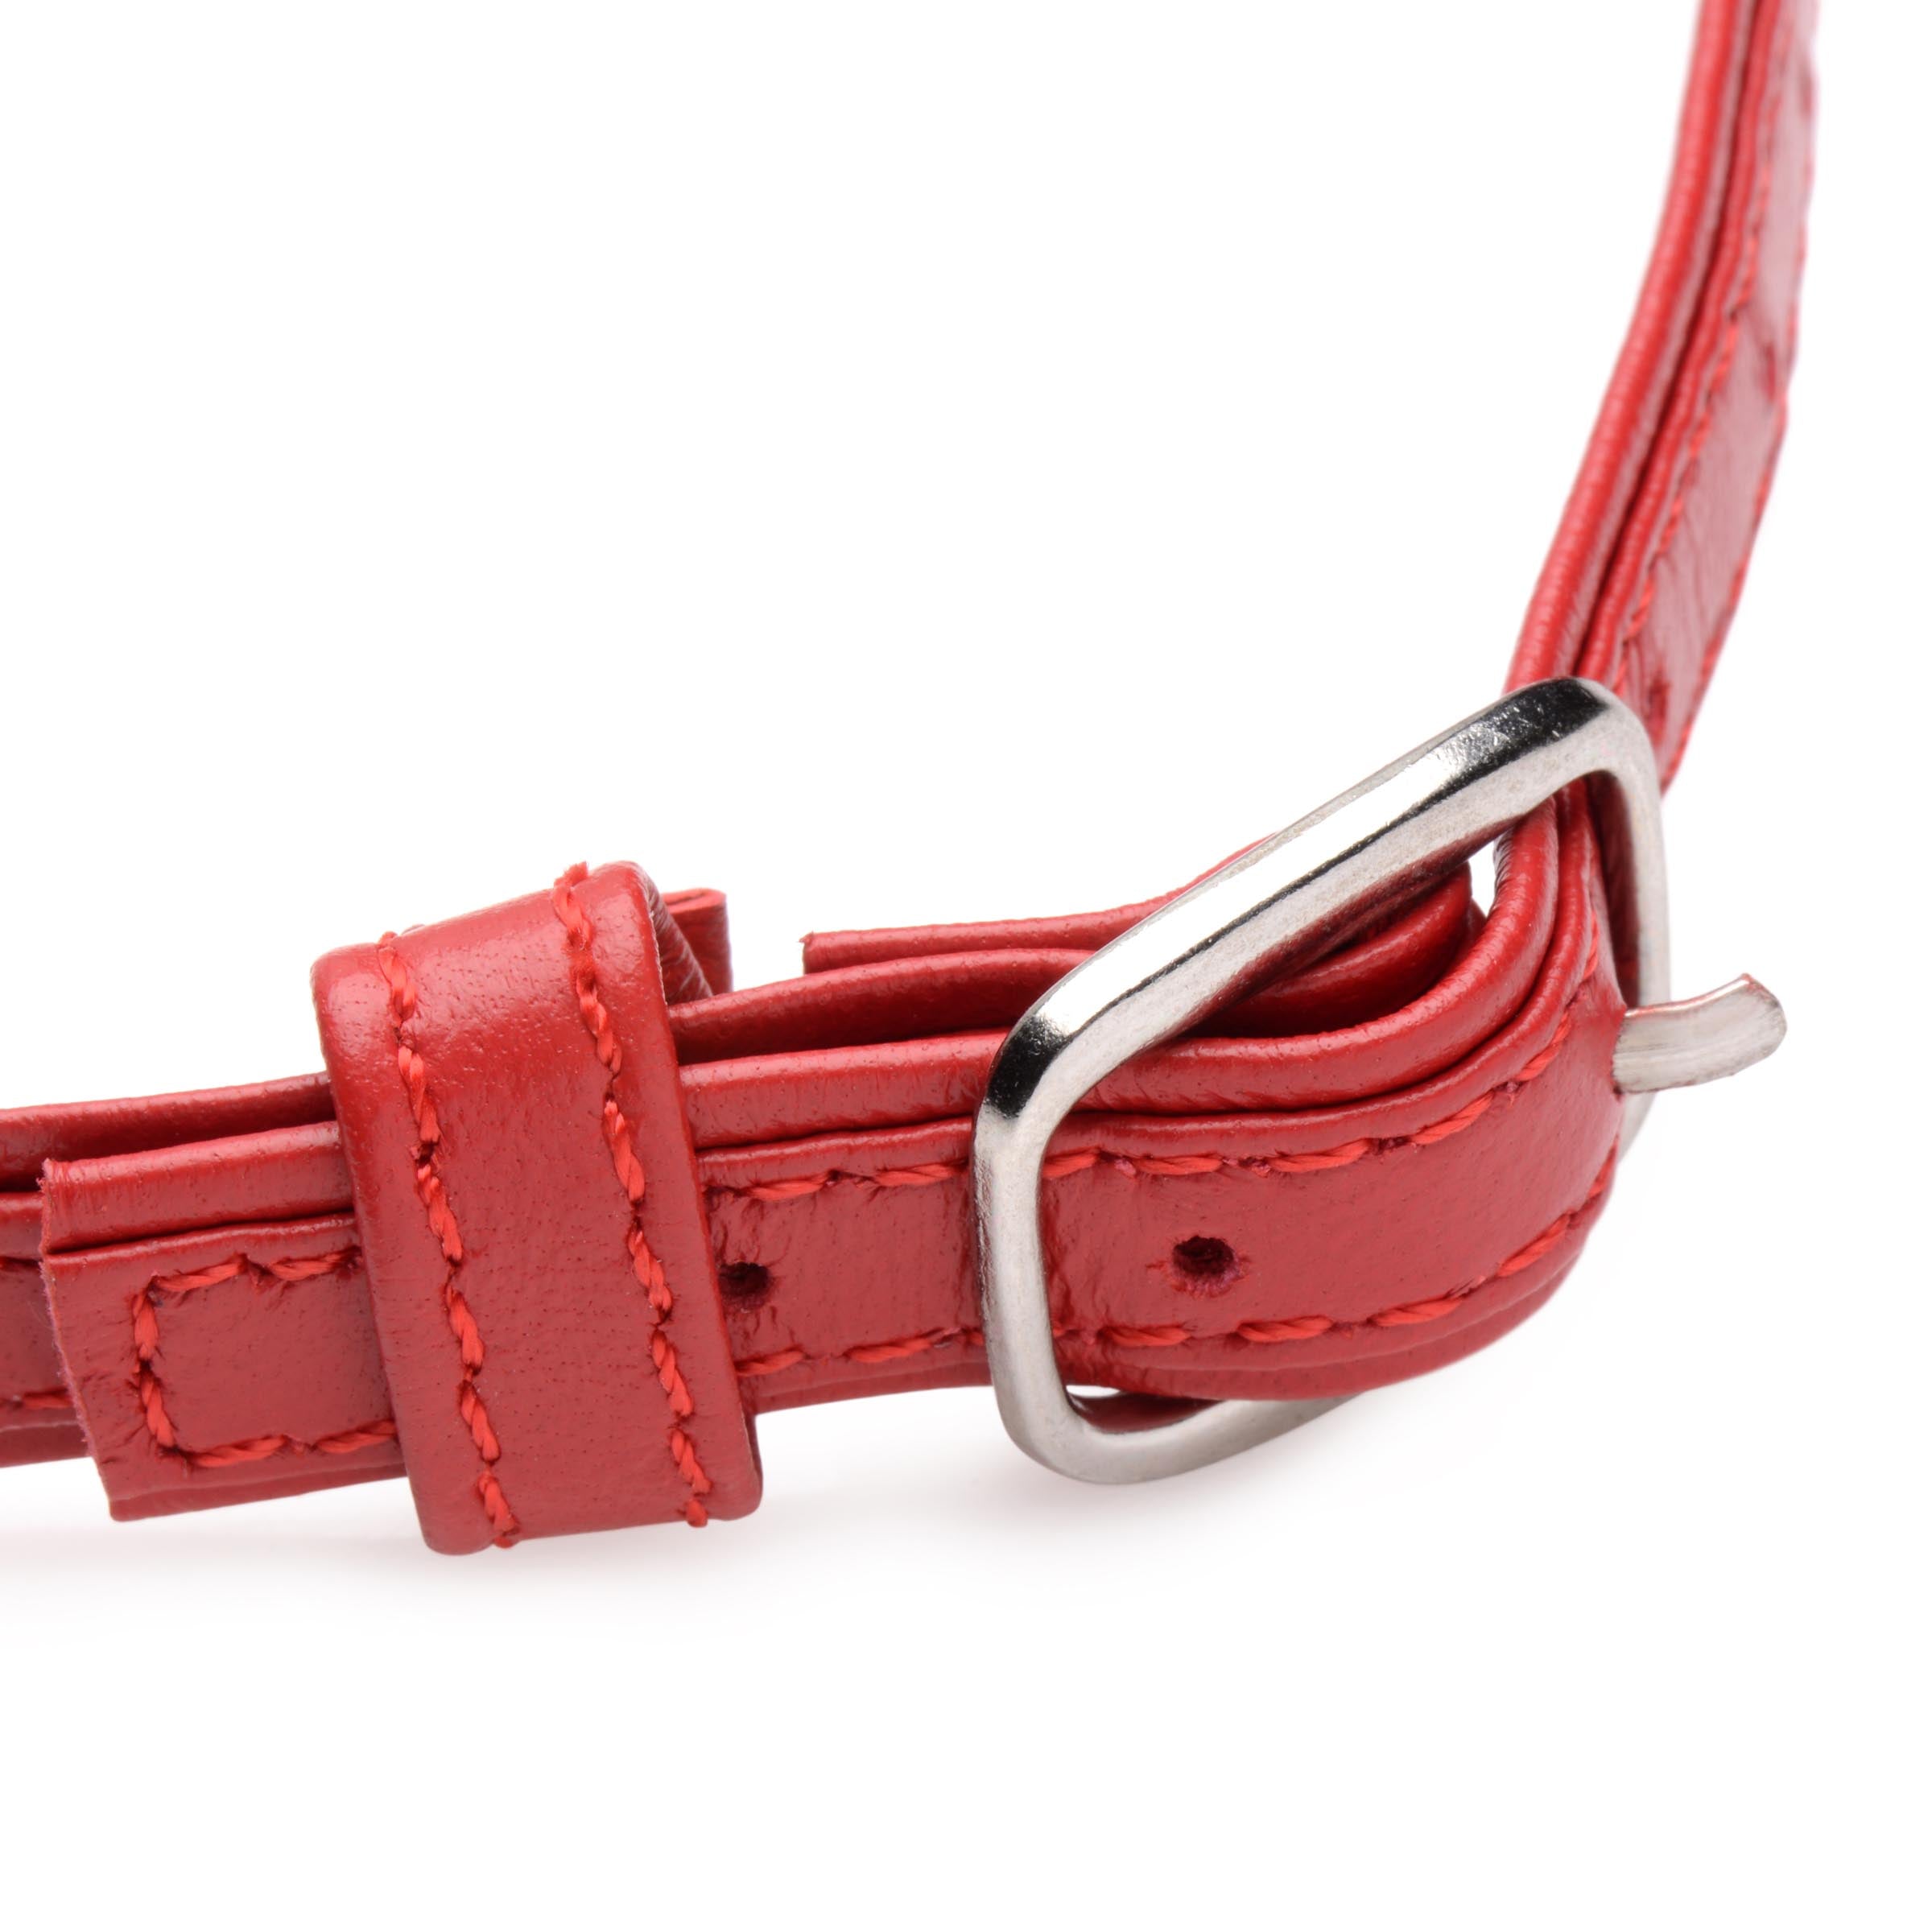 Fiery Pet Leather Choker with Silver Ring